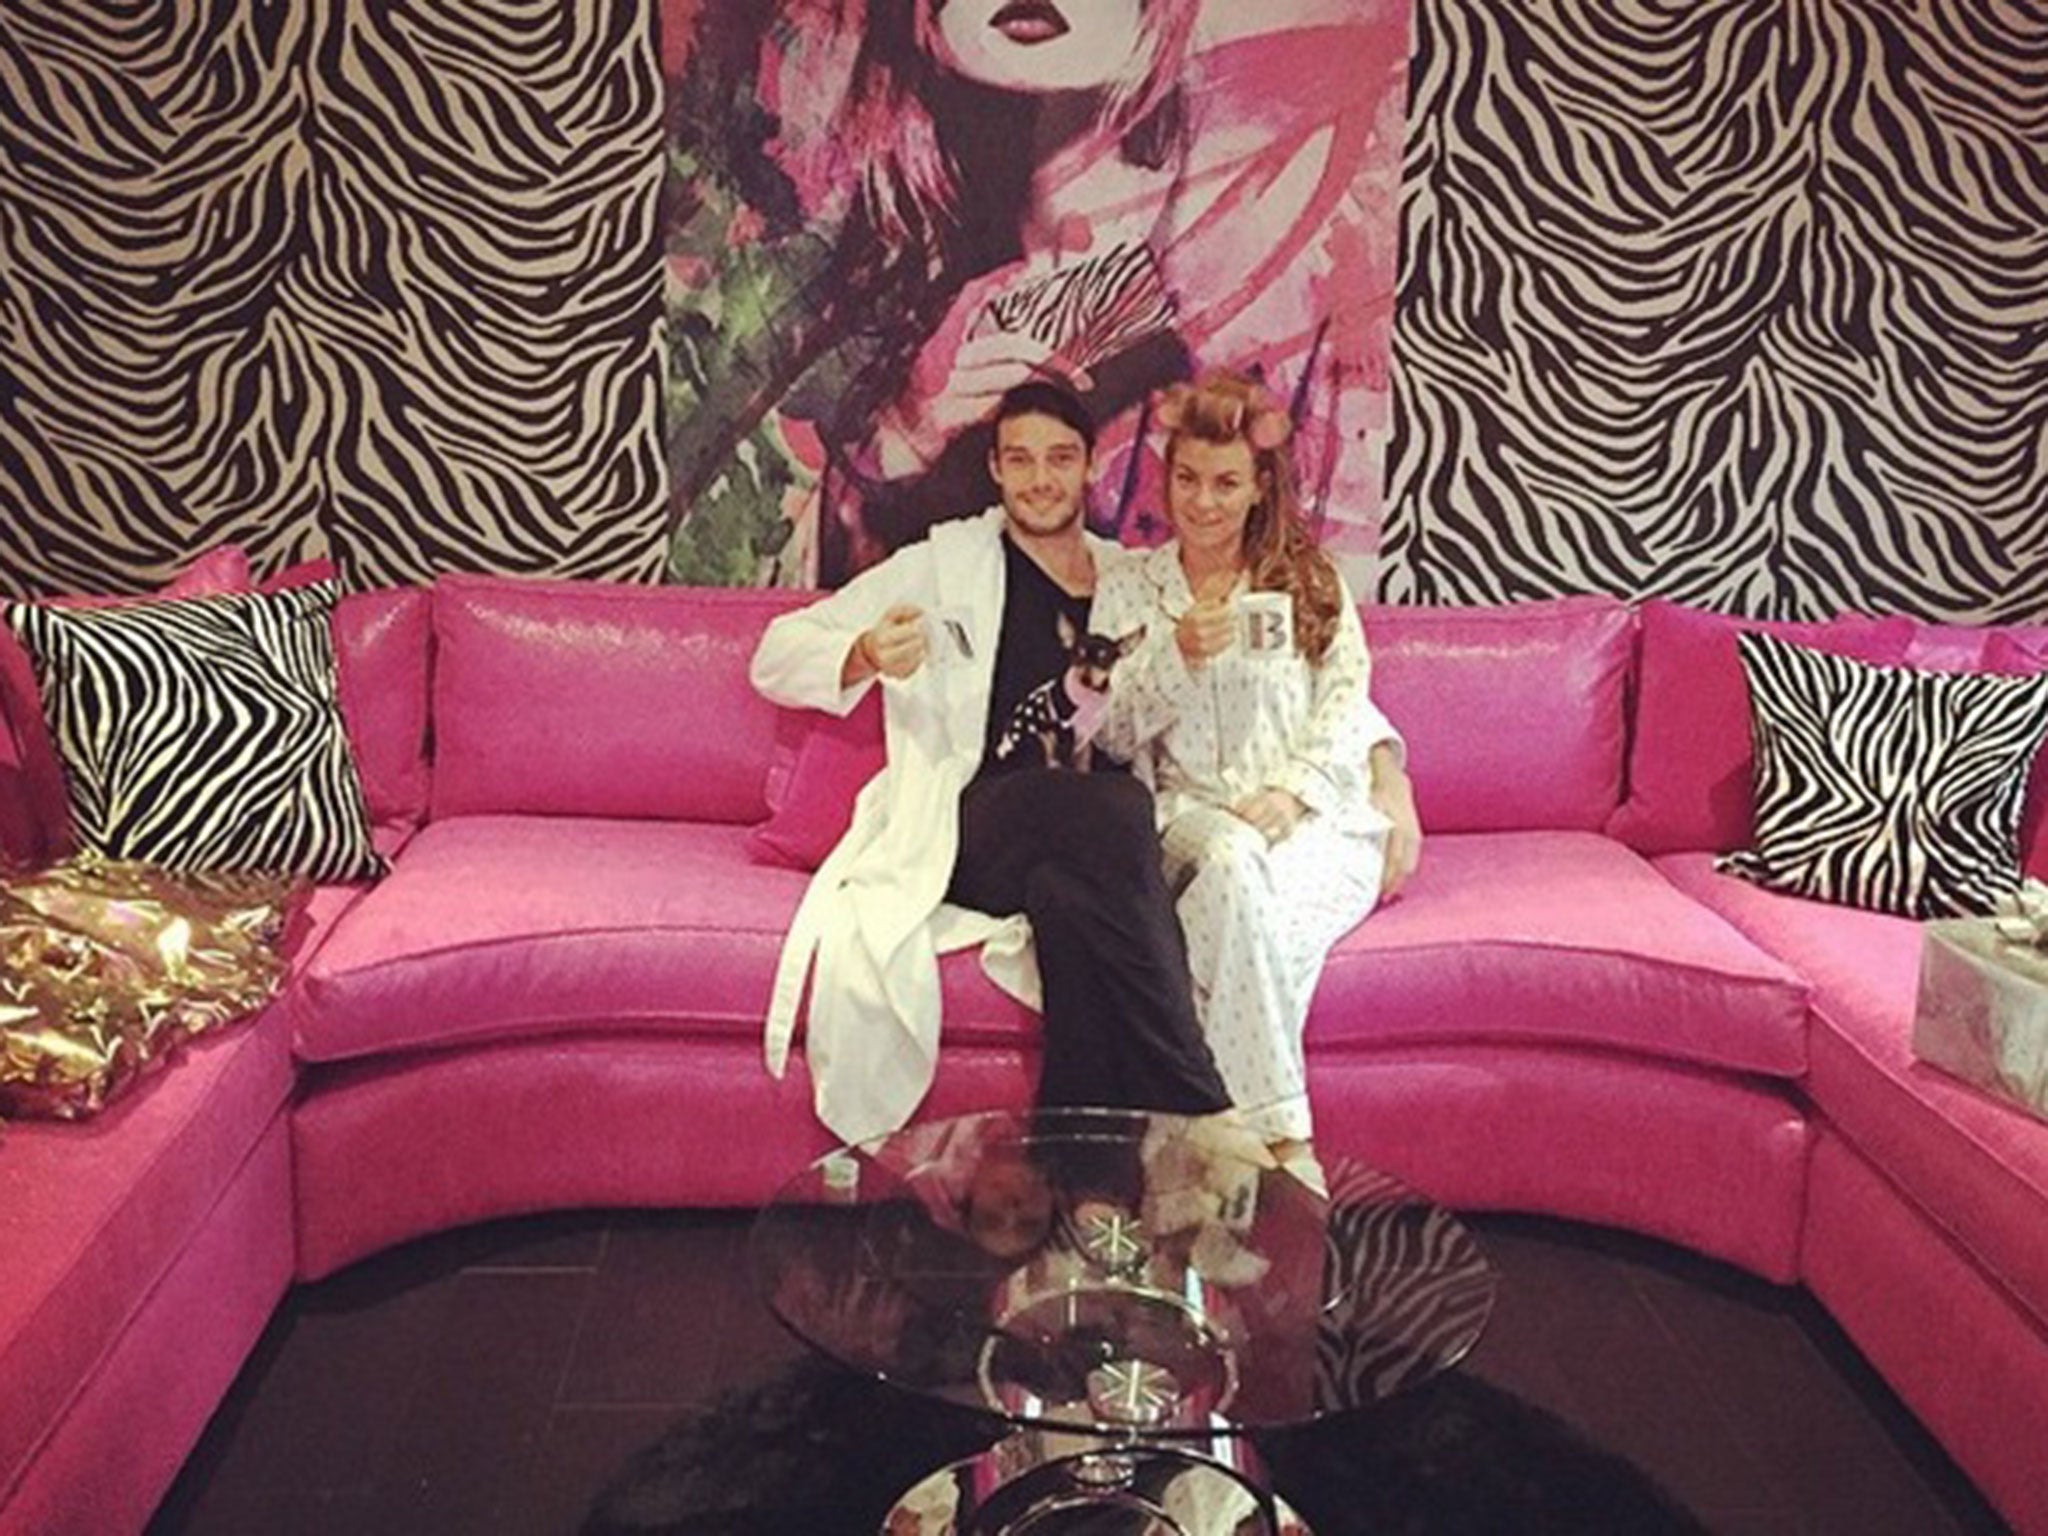 Andy Carroll and Billi Mucklow's zebra-walled living room